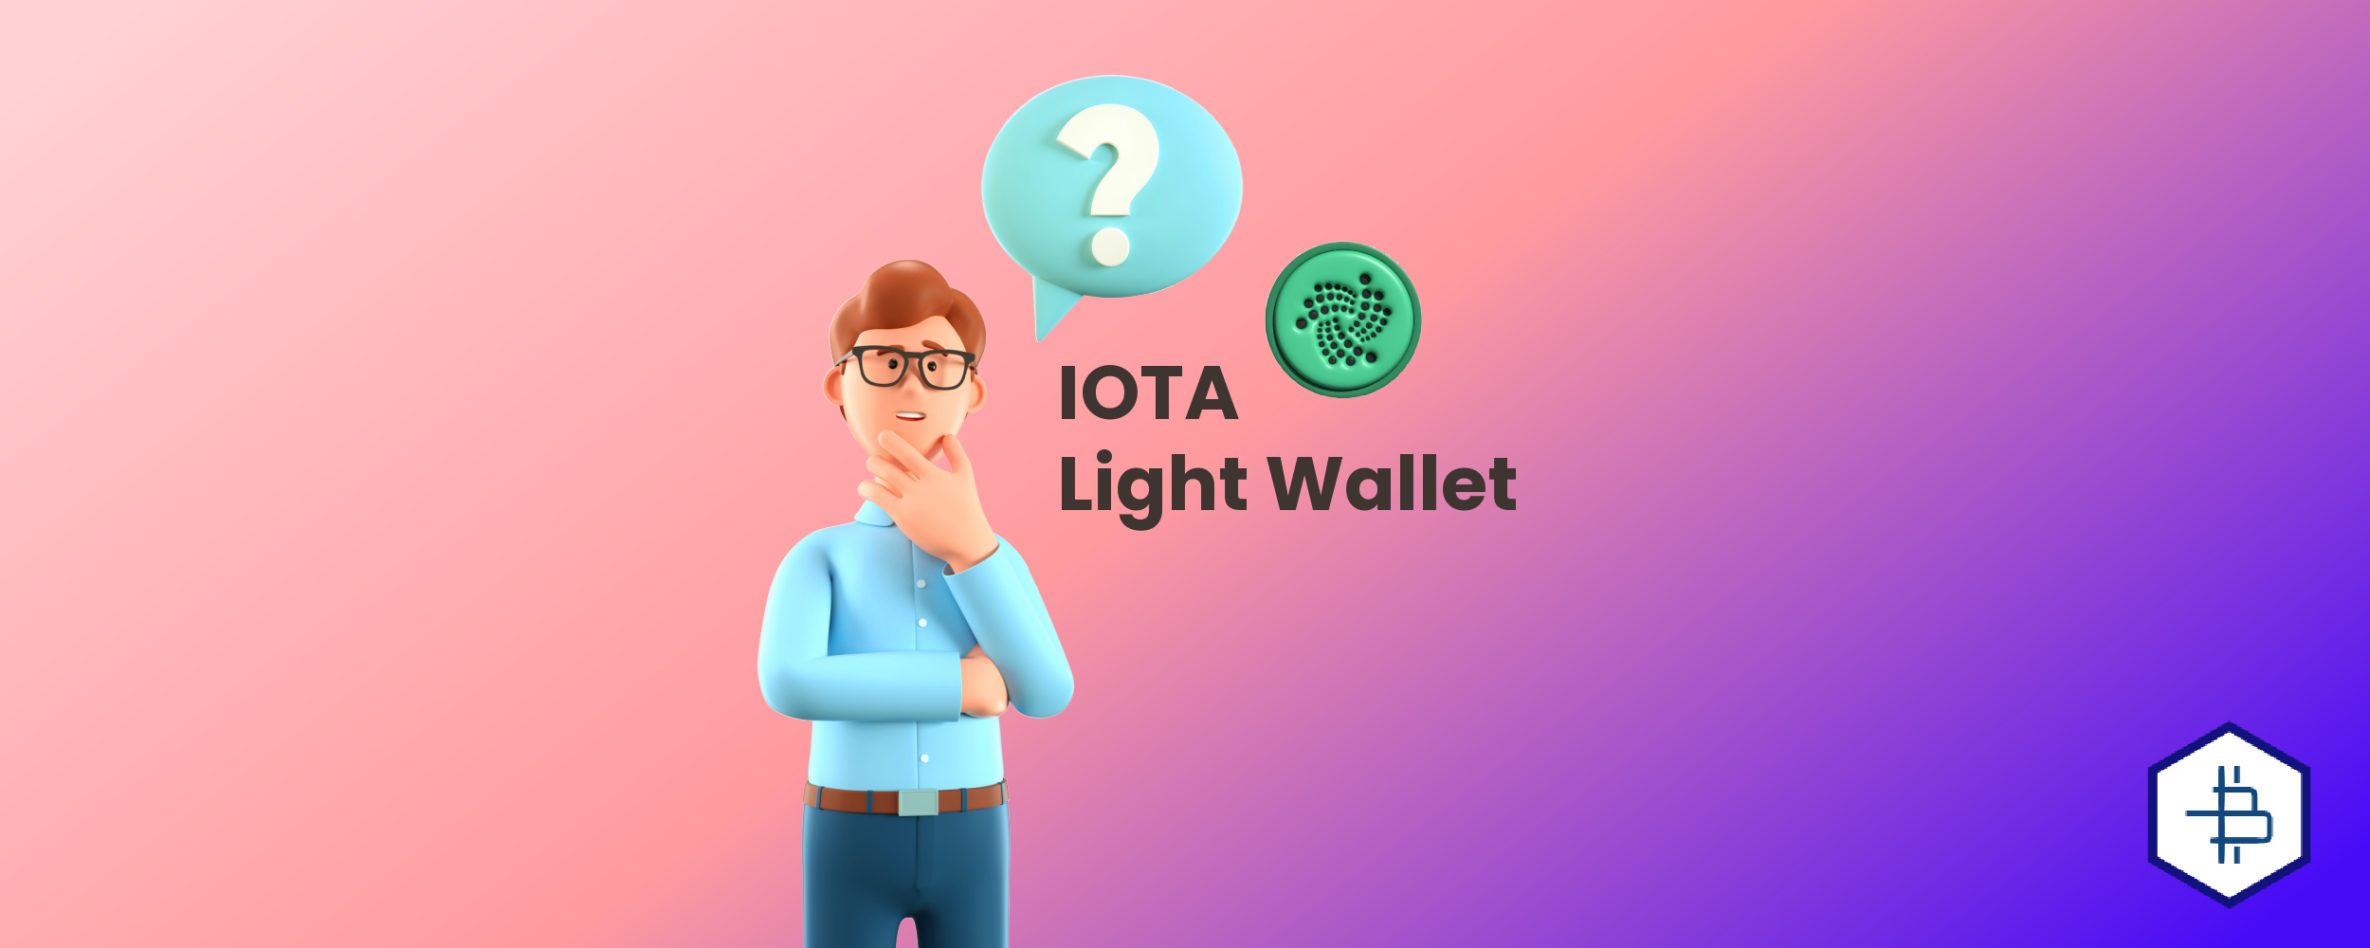 TanglePay | An IOTA wallet to manage and use your IOTA token securely.